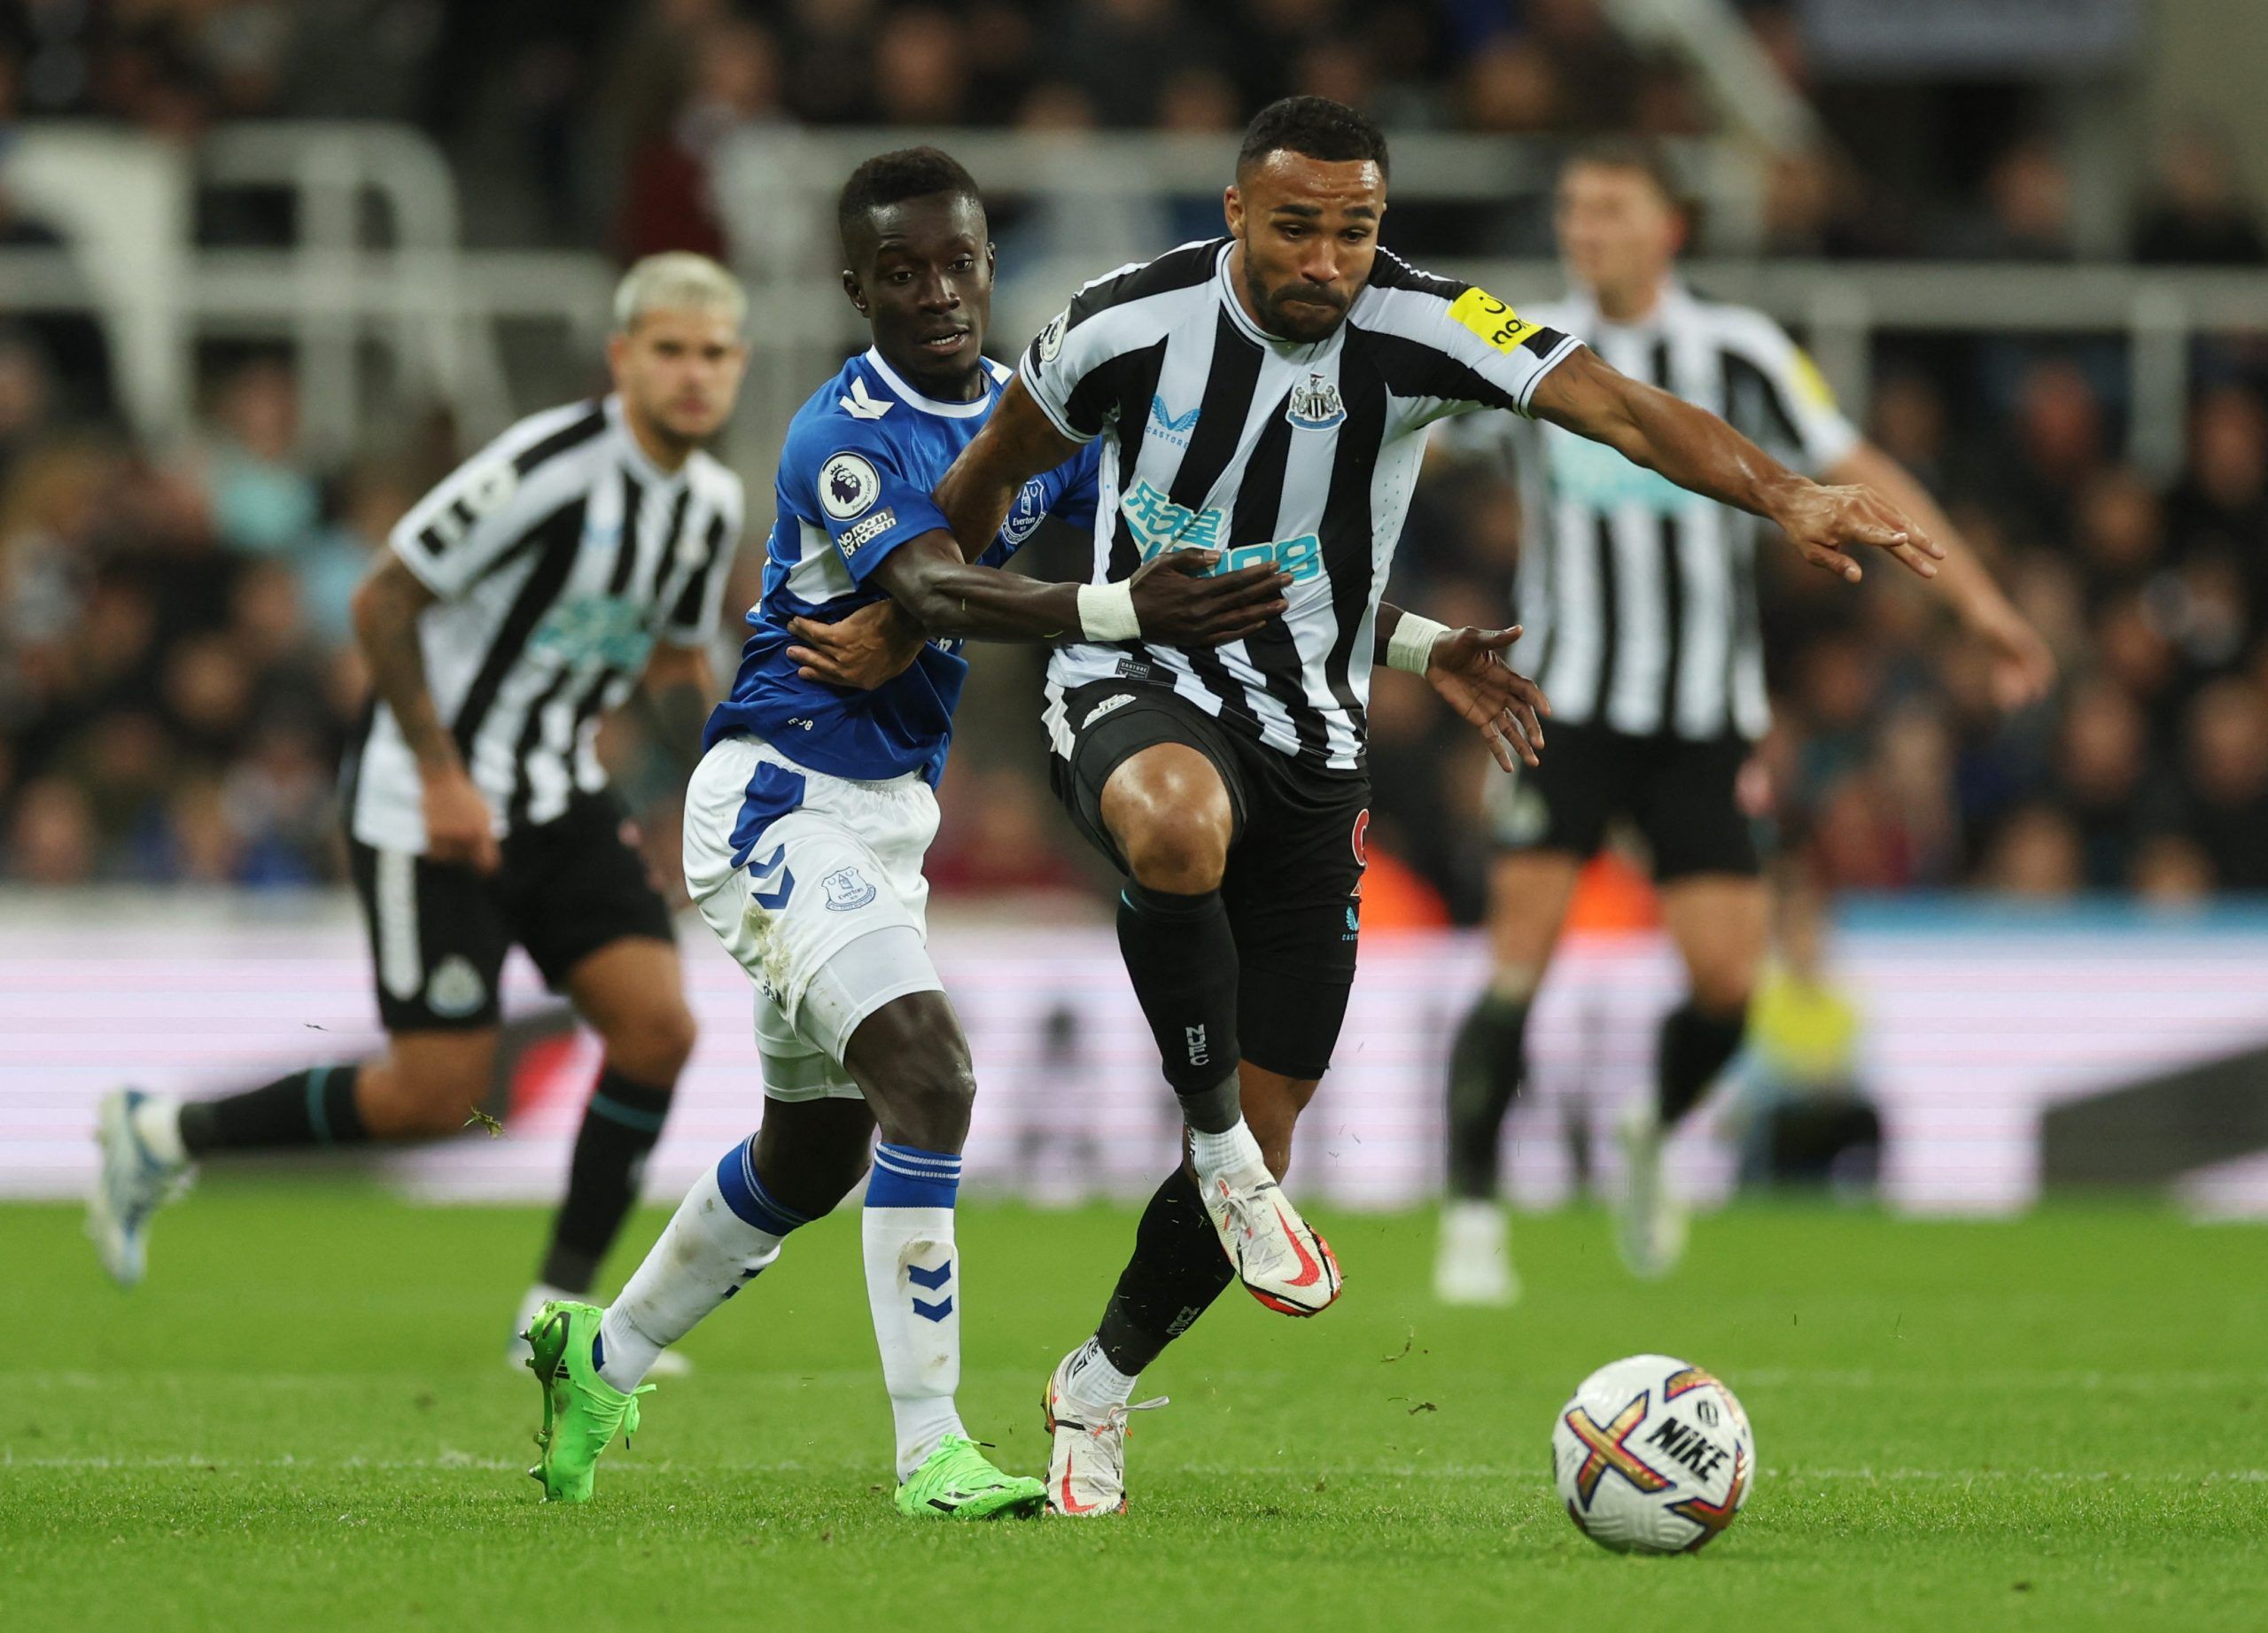 Soccer Football - Premier League - Newcastle United v Everton - St James' Park, Newcastle, Britain - October 19, 2022 Everton's Idrissa Gueye in action with Newcastle United's Callum Wilson Action Images via Reuters/Lee Smith EDITORIAL USE ONLY. No use with unauthorized audio, video, data, fixture lists, club/league logos or 'live' services. Online in-match use limited to 75 images, no video emulation. No use in betting, games or single club /league/player publications.  Please contact your acco